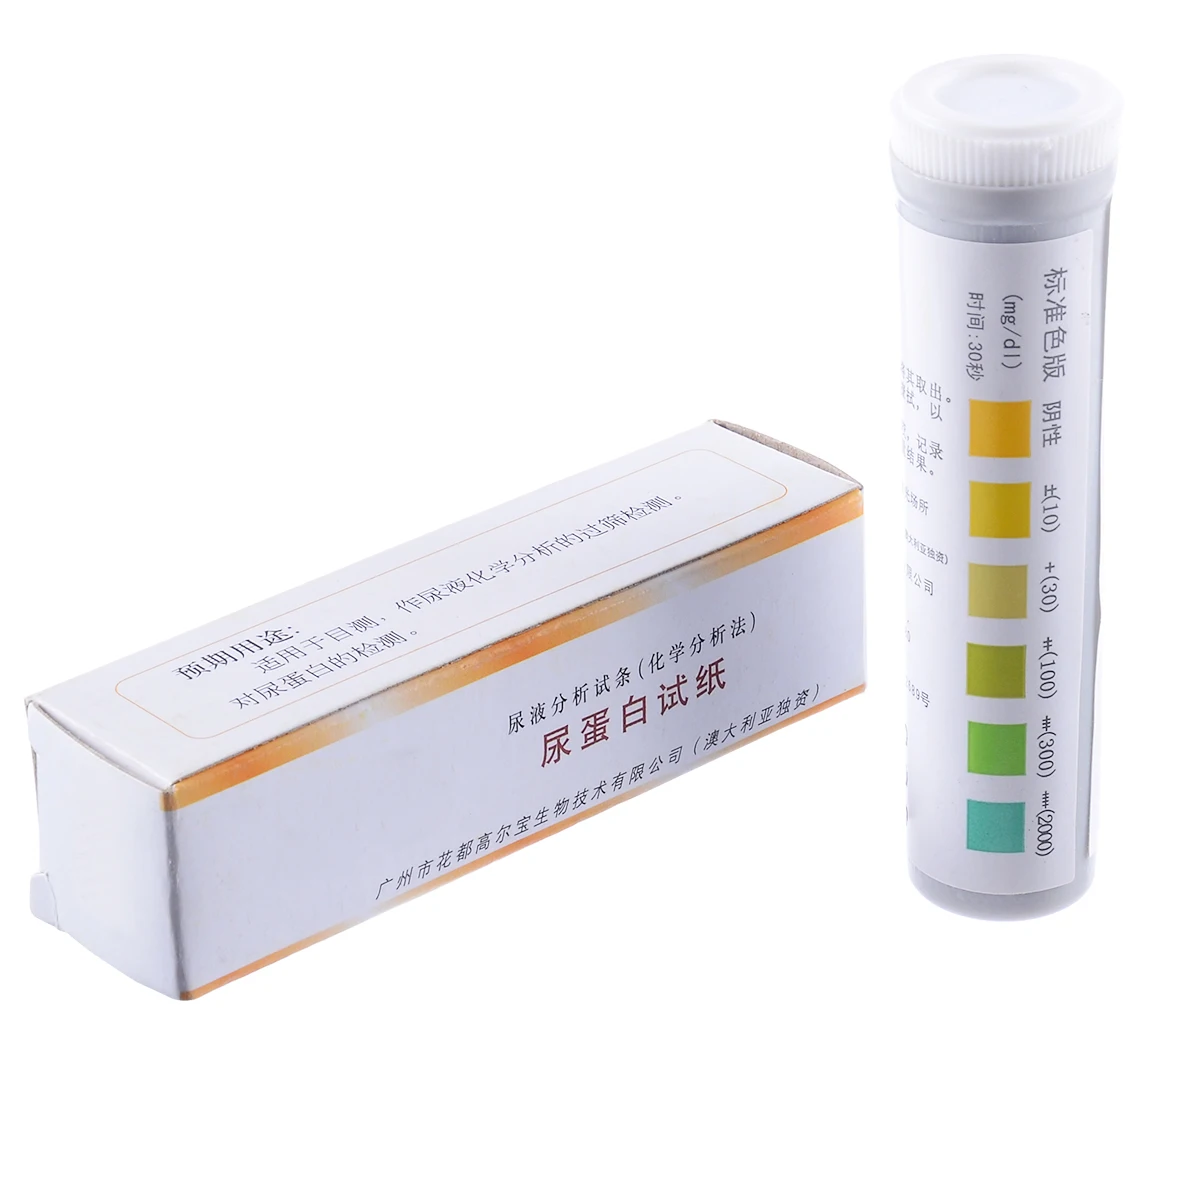 New Arrival 20Pcs/Box Test Protein Urine Test Strips Kidney Urinary Tract Infection Check Test Strips